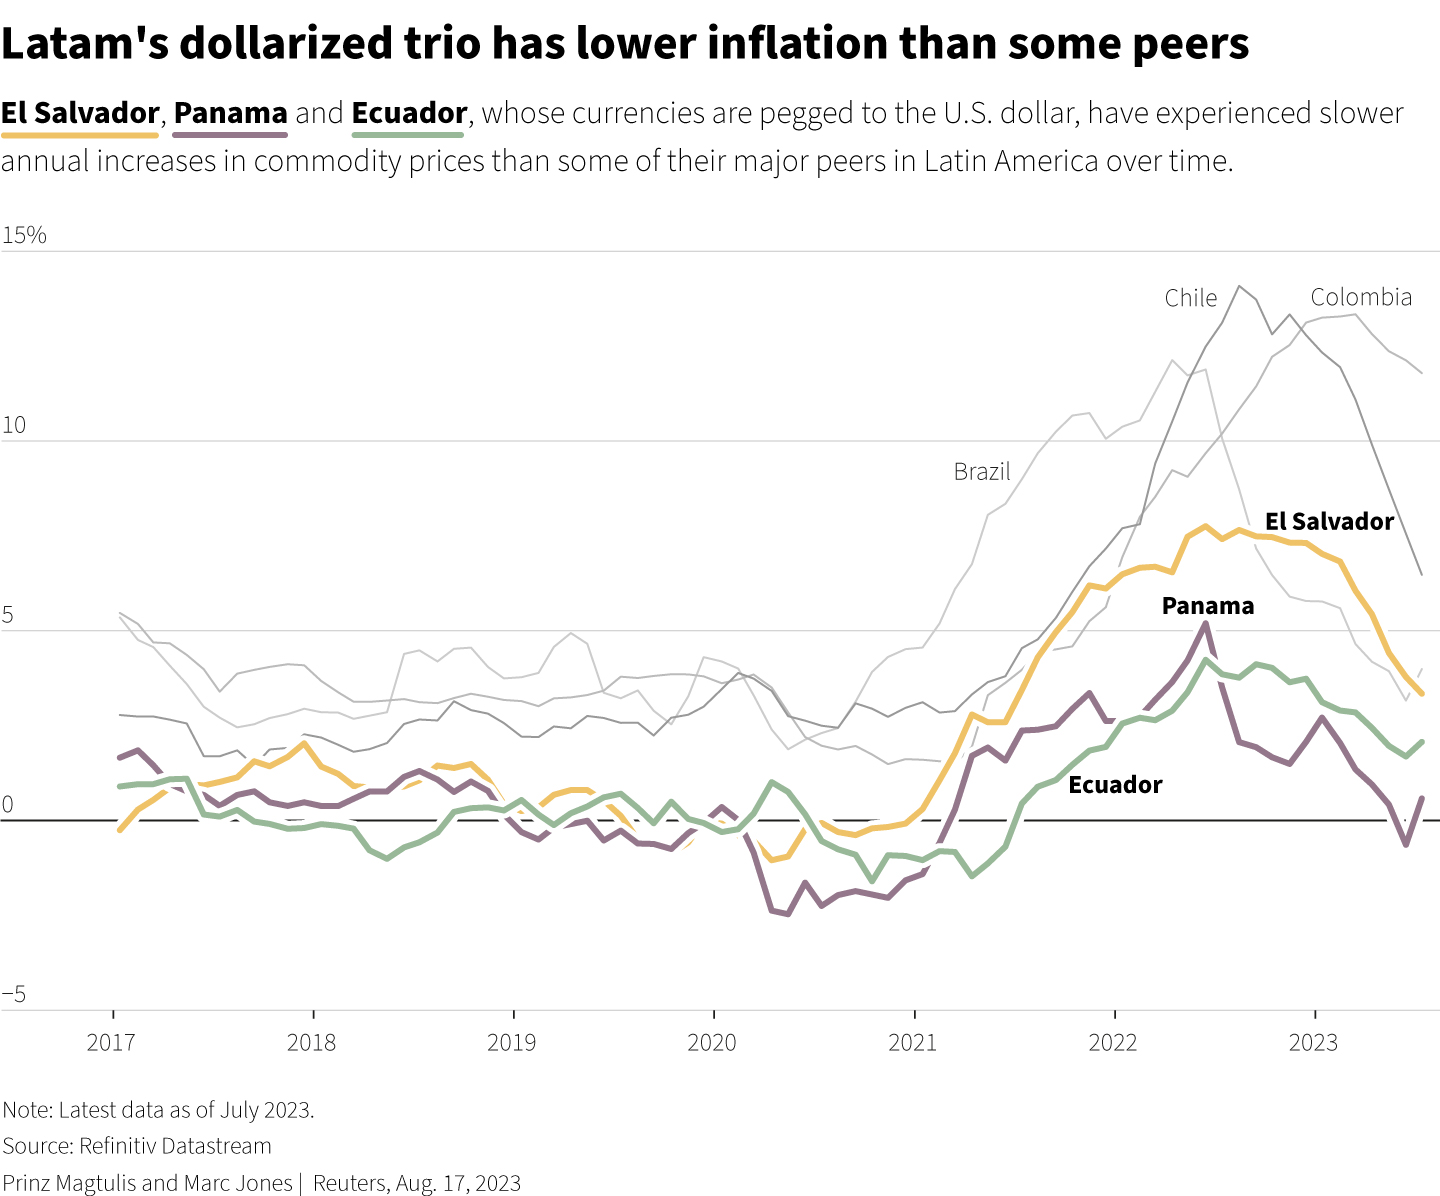 Line chart show El Salvador, Panama and Ecuador, whose local currencies are pegged to the dollar, have experienced slower annual inflation from 2017 to 2023 compared with Latin America peers.